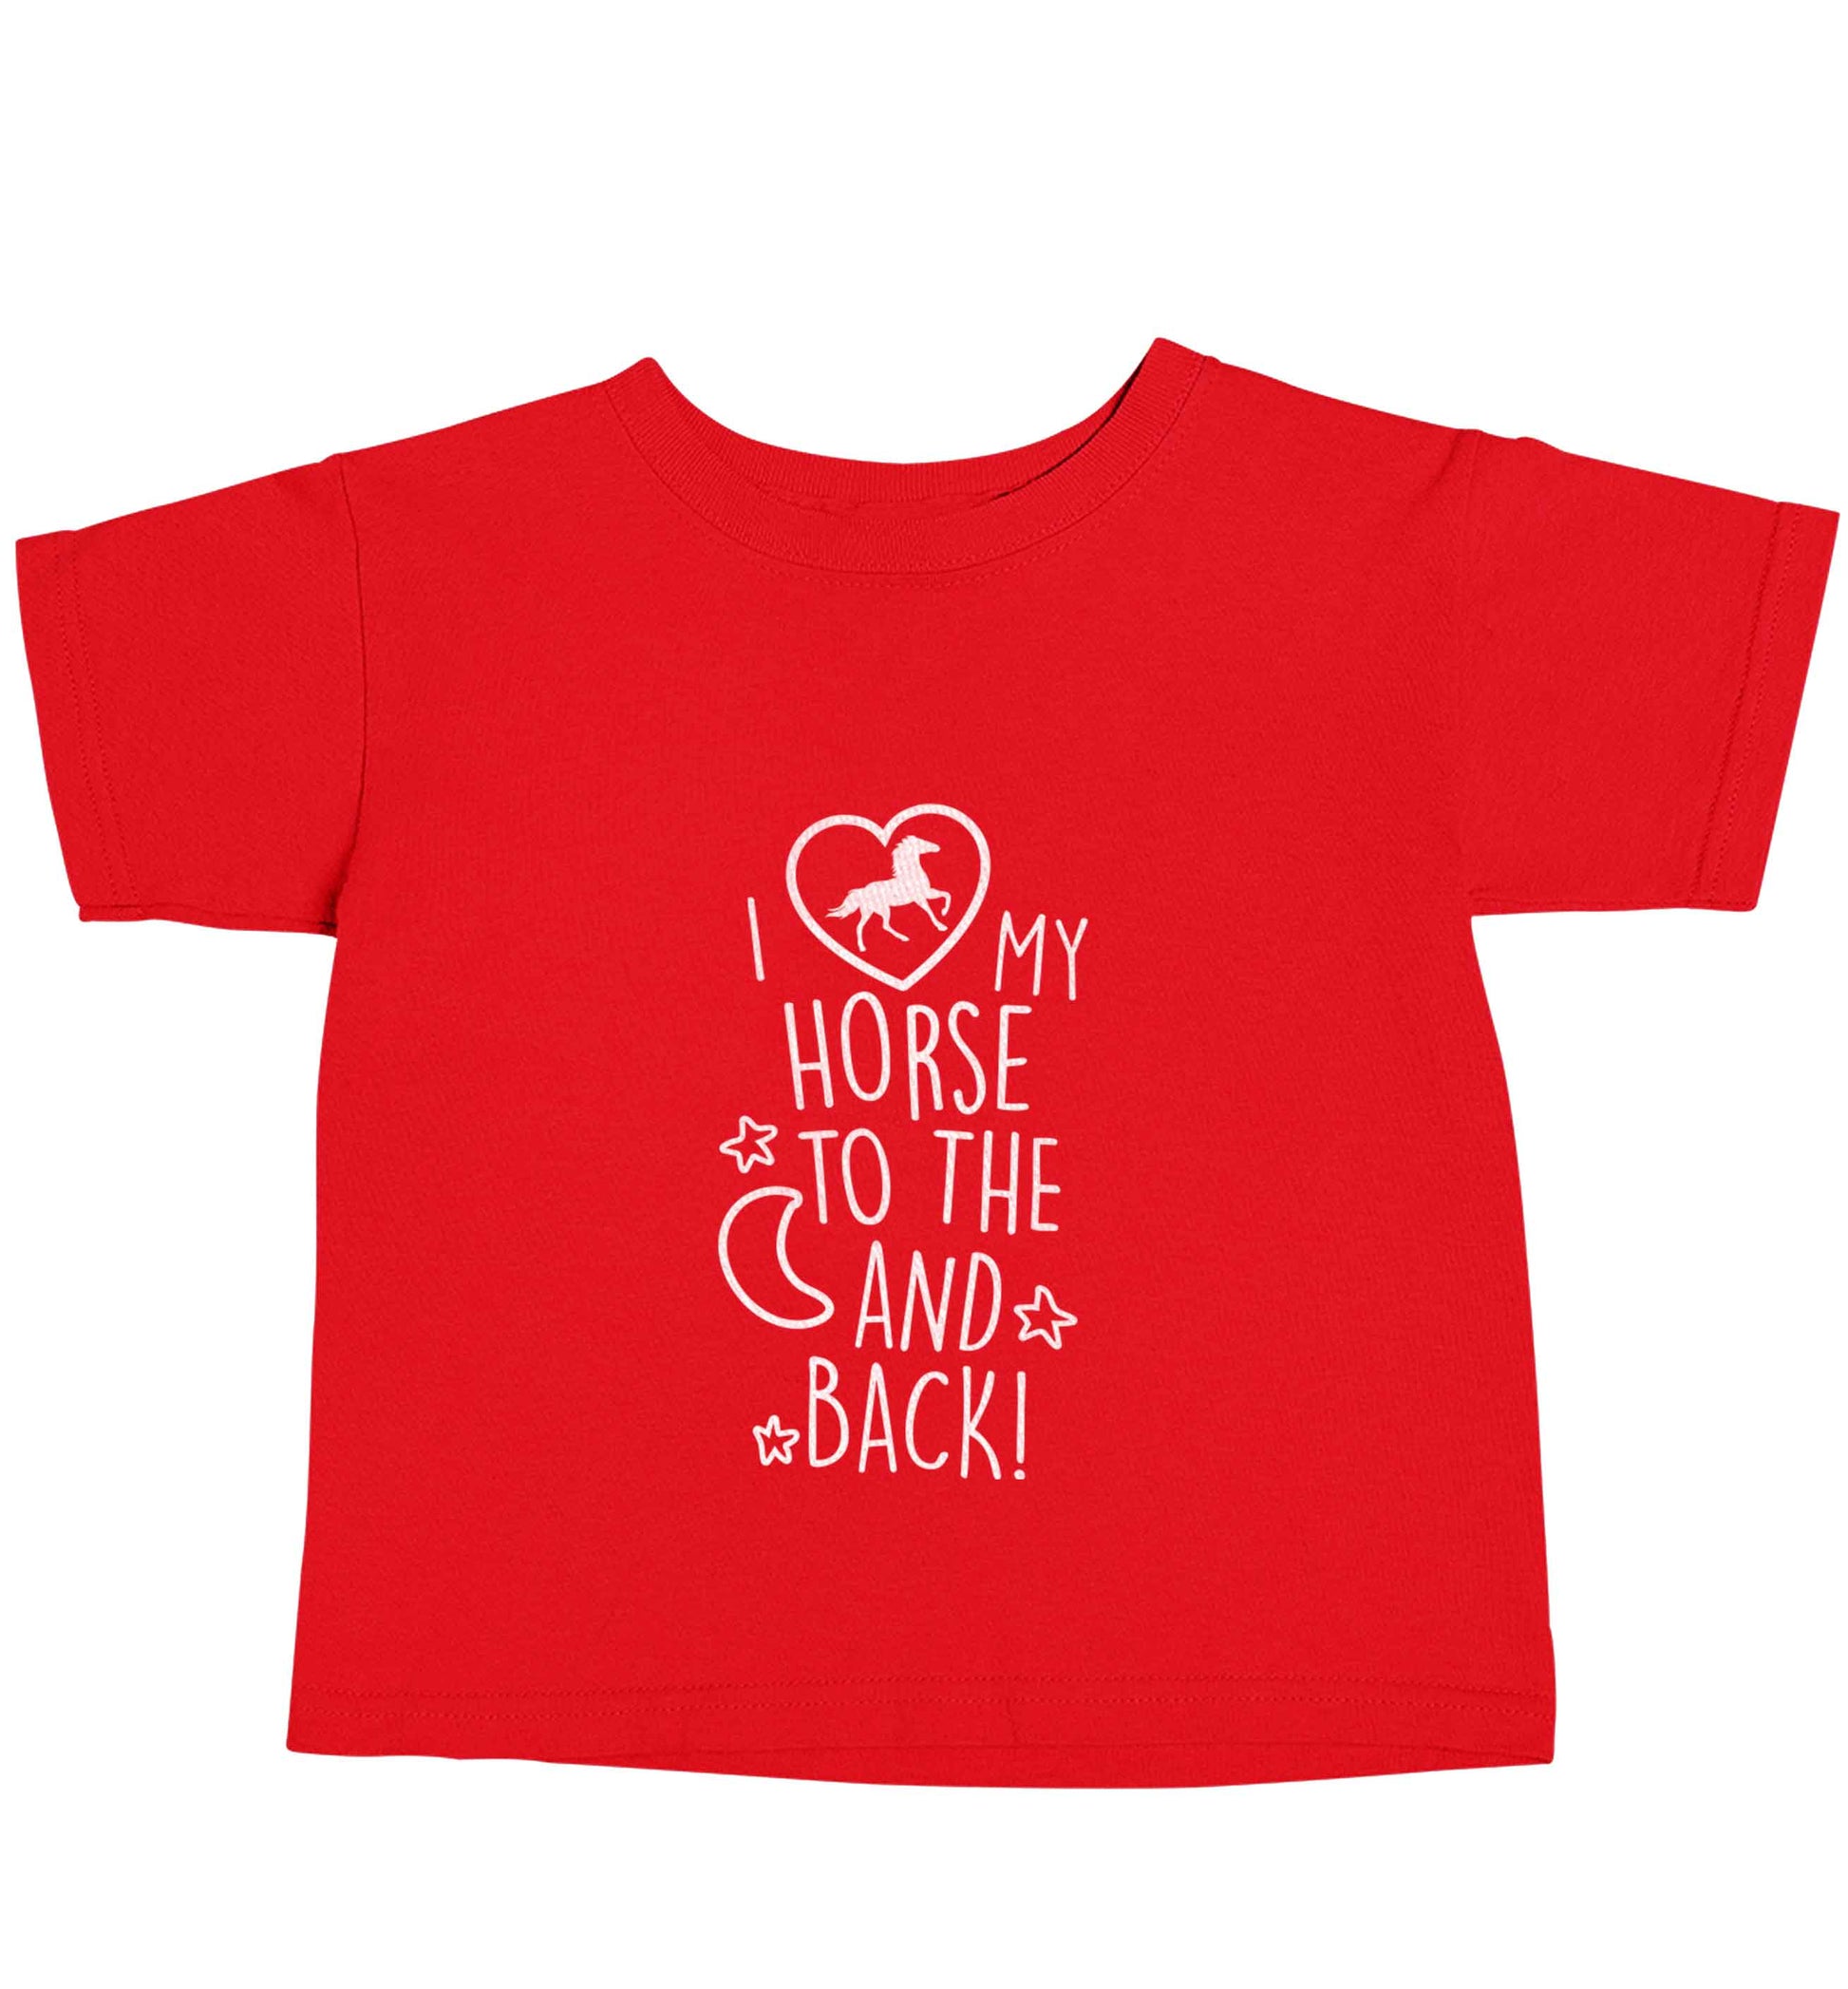 I love my horse to the moon and back red baby toddler Tshirt 2 Years